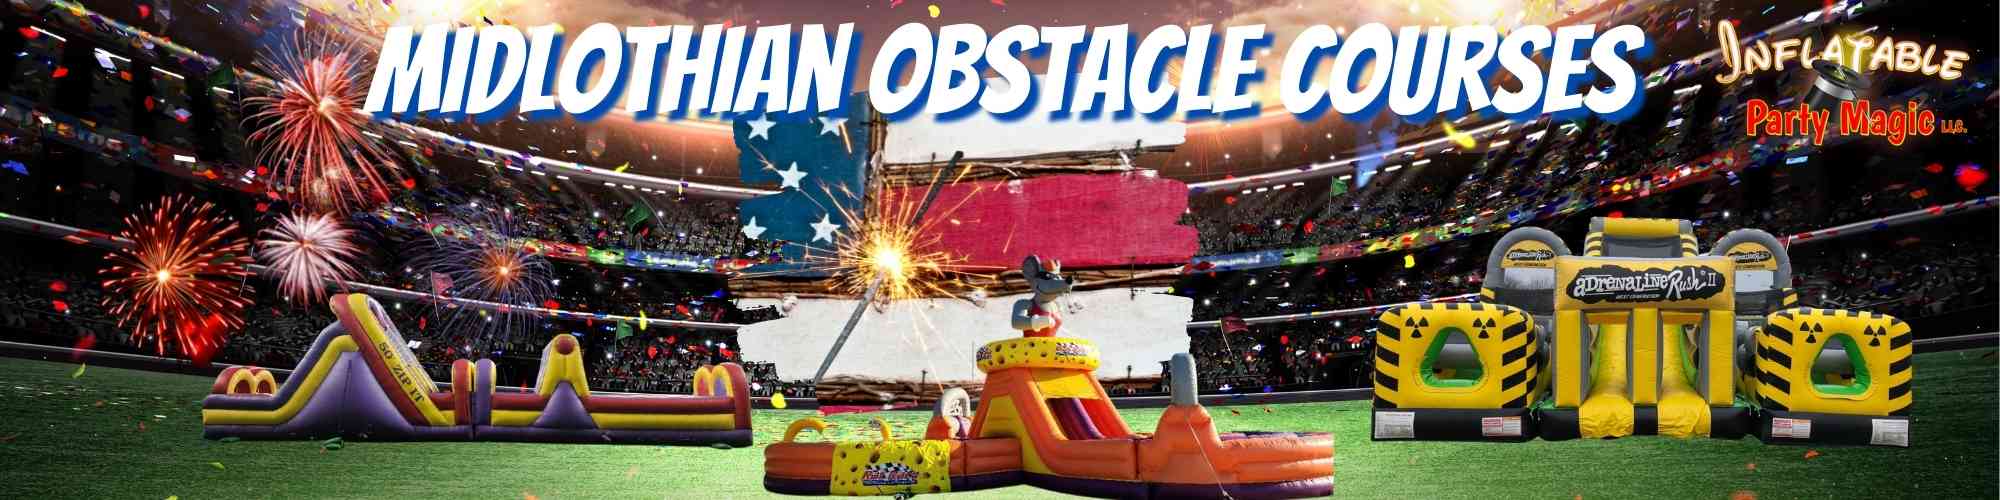 Midlothian Obstacle Course Rentals